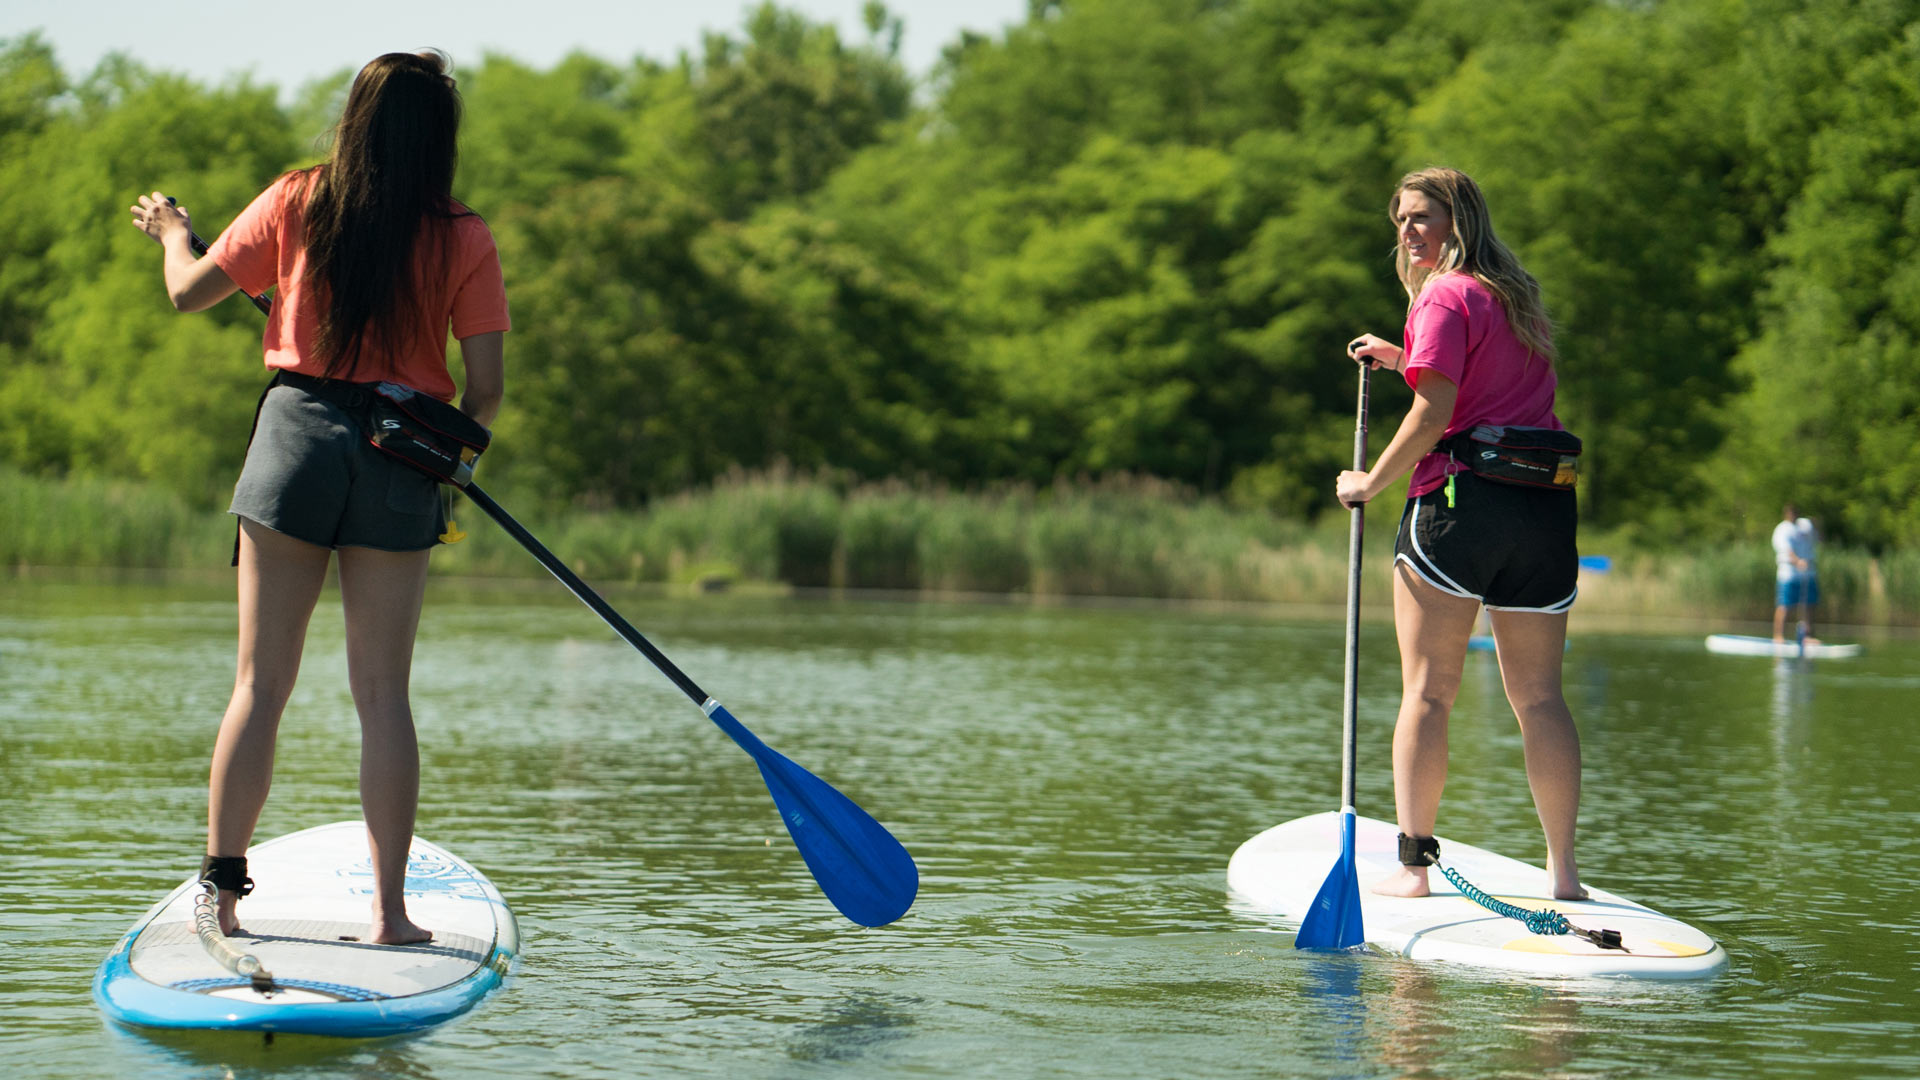 Paddle boarders on the quarry lake at Quarry Trails Metro Park.